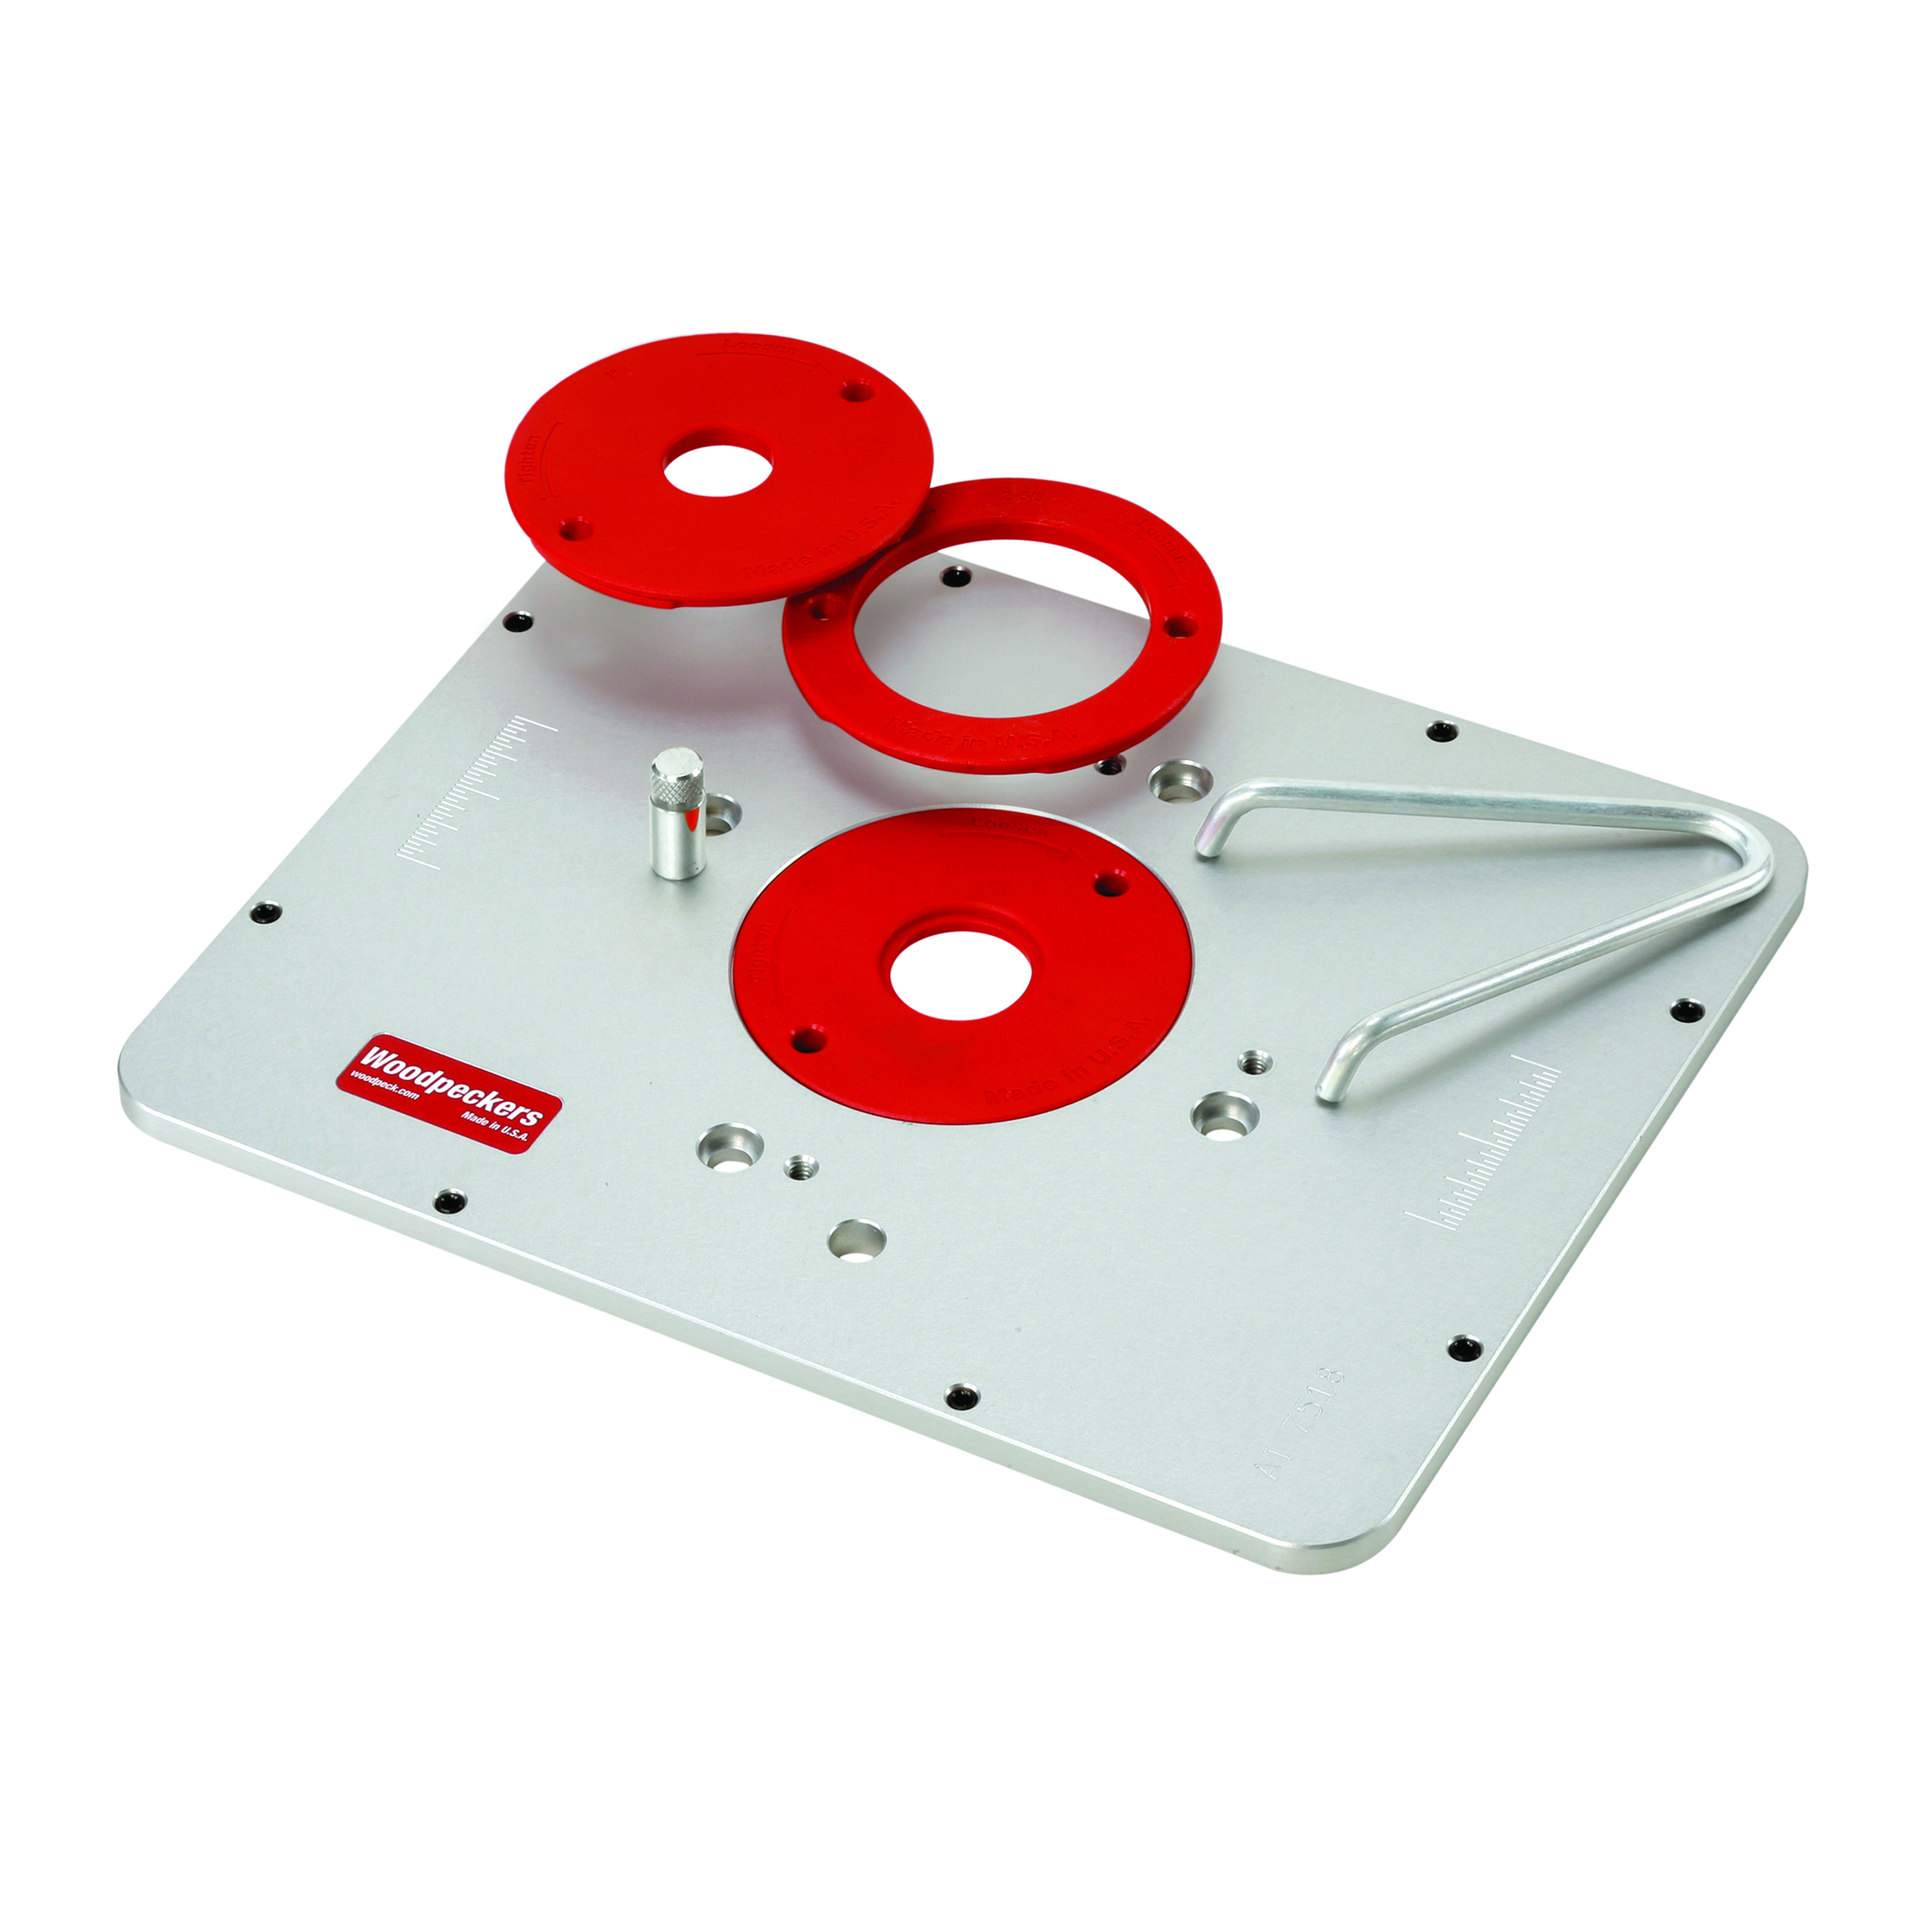 Aluminum Router Plate For Pc7518